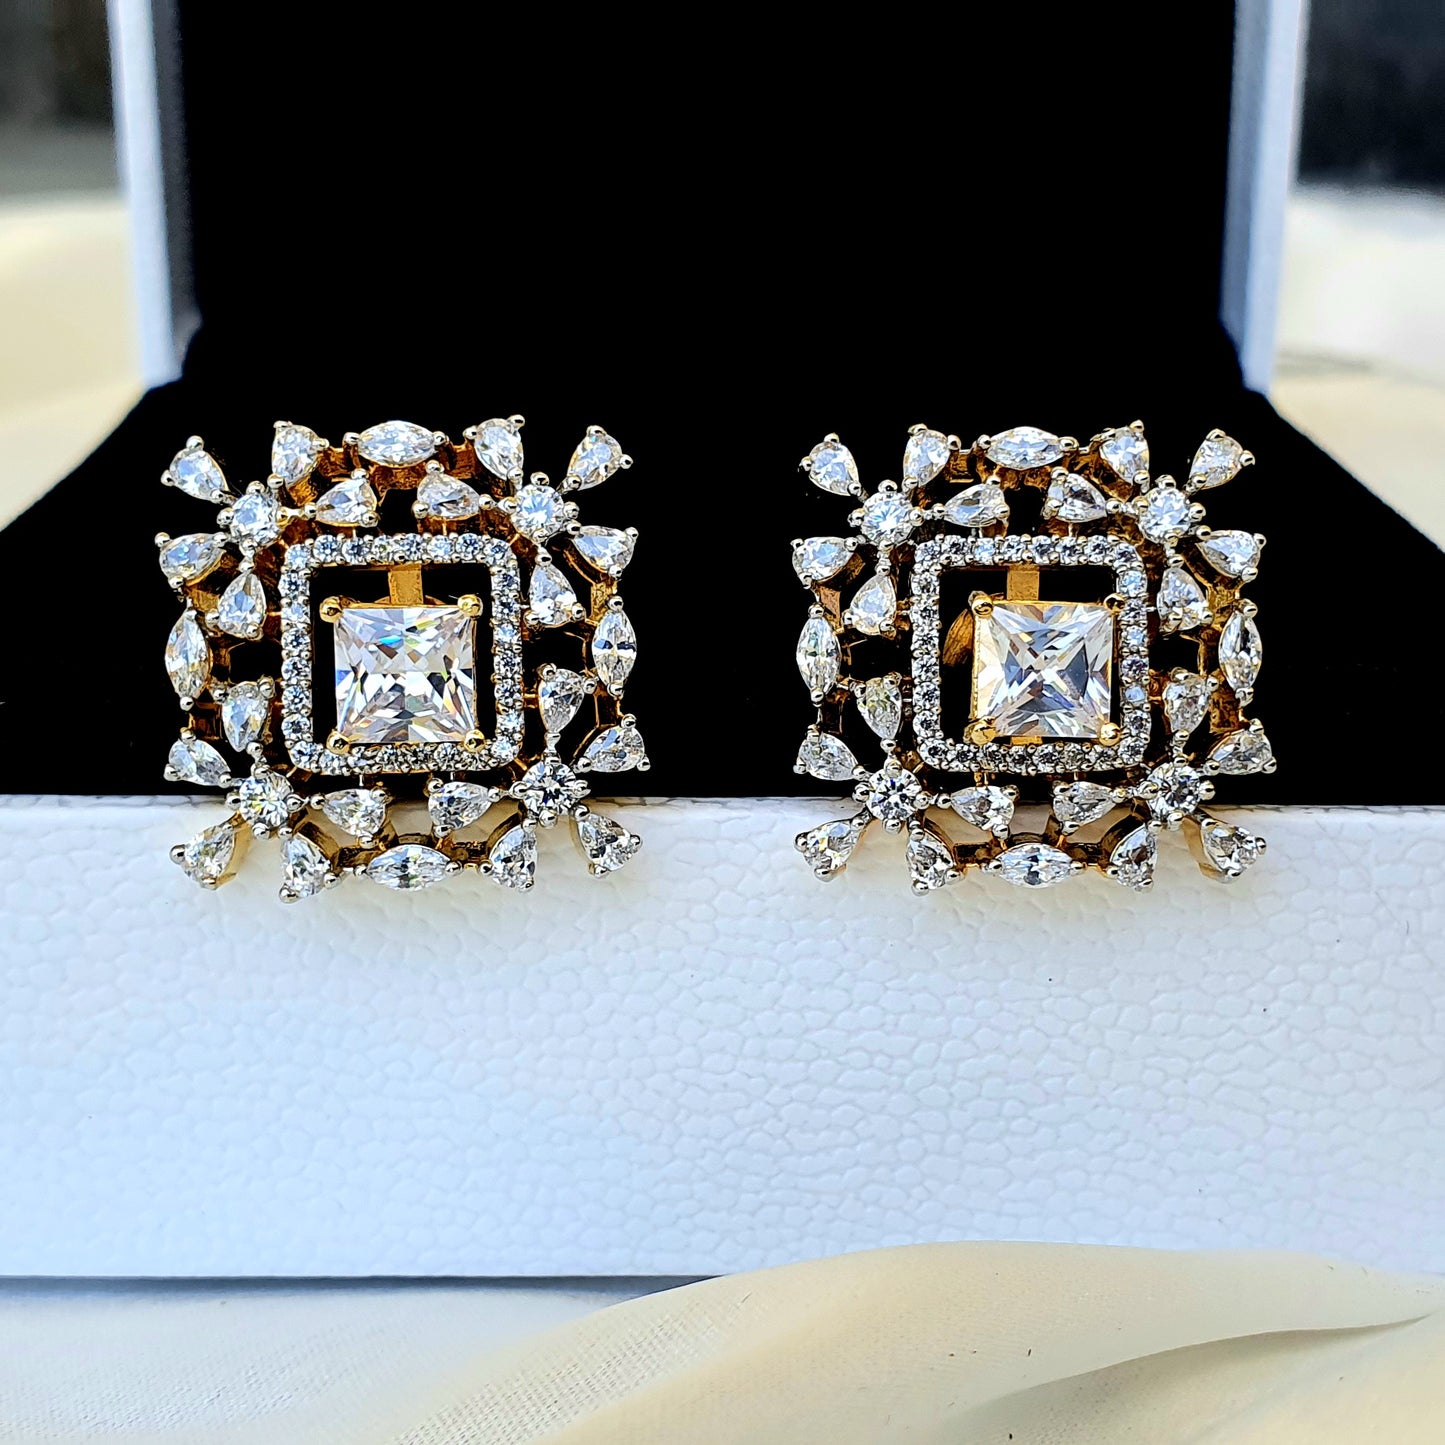 Exquisite Diamond Setting Earring with Interchangeable Stones